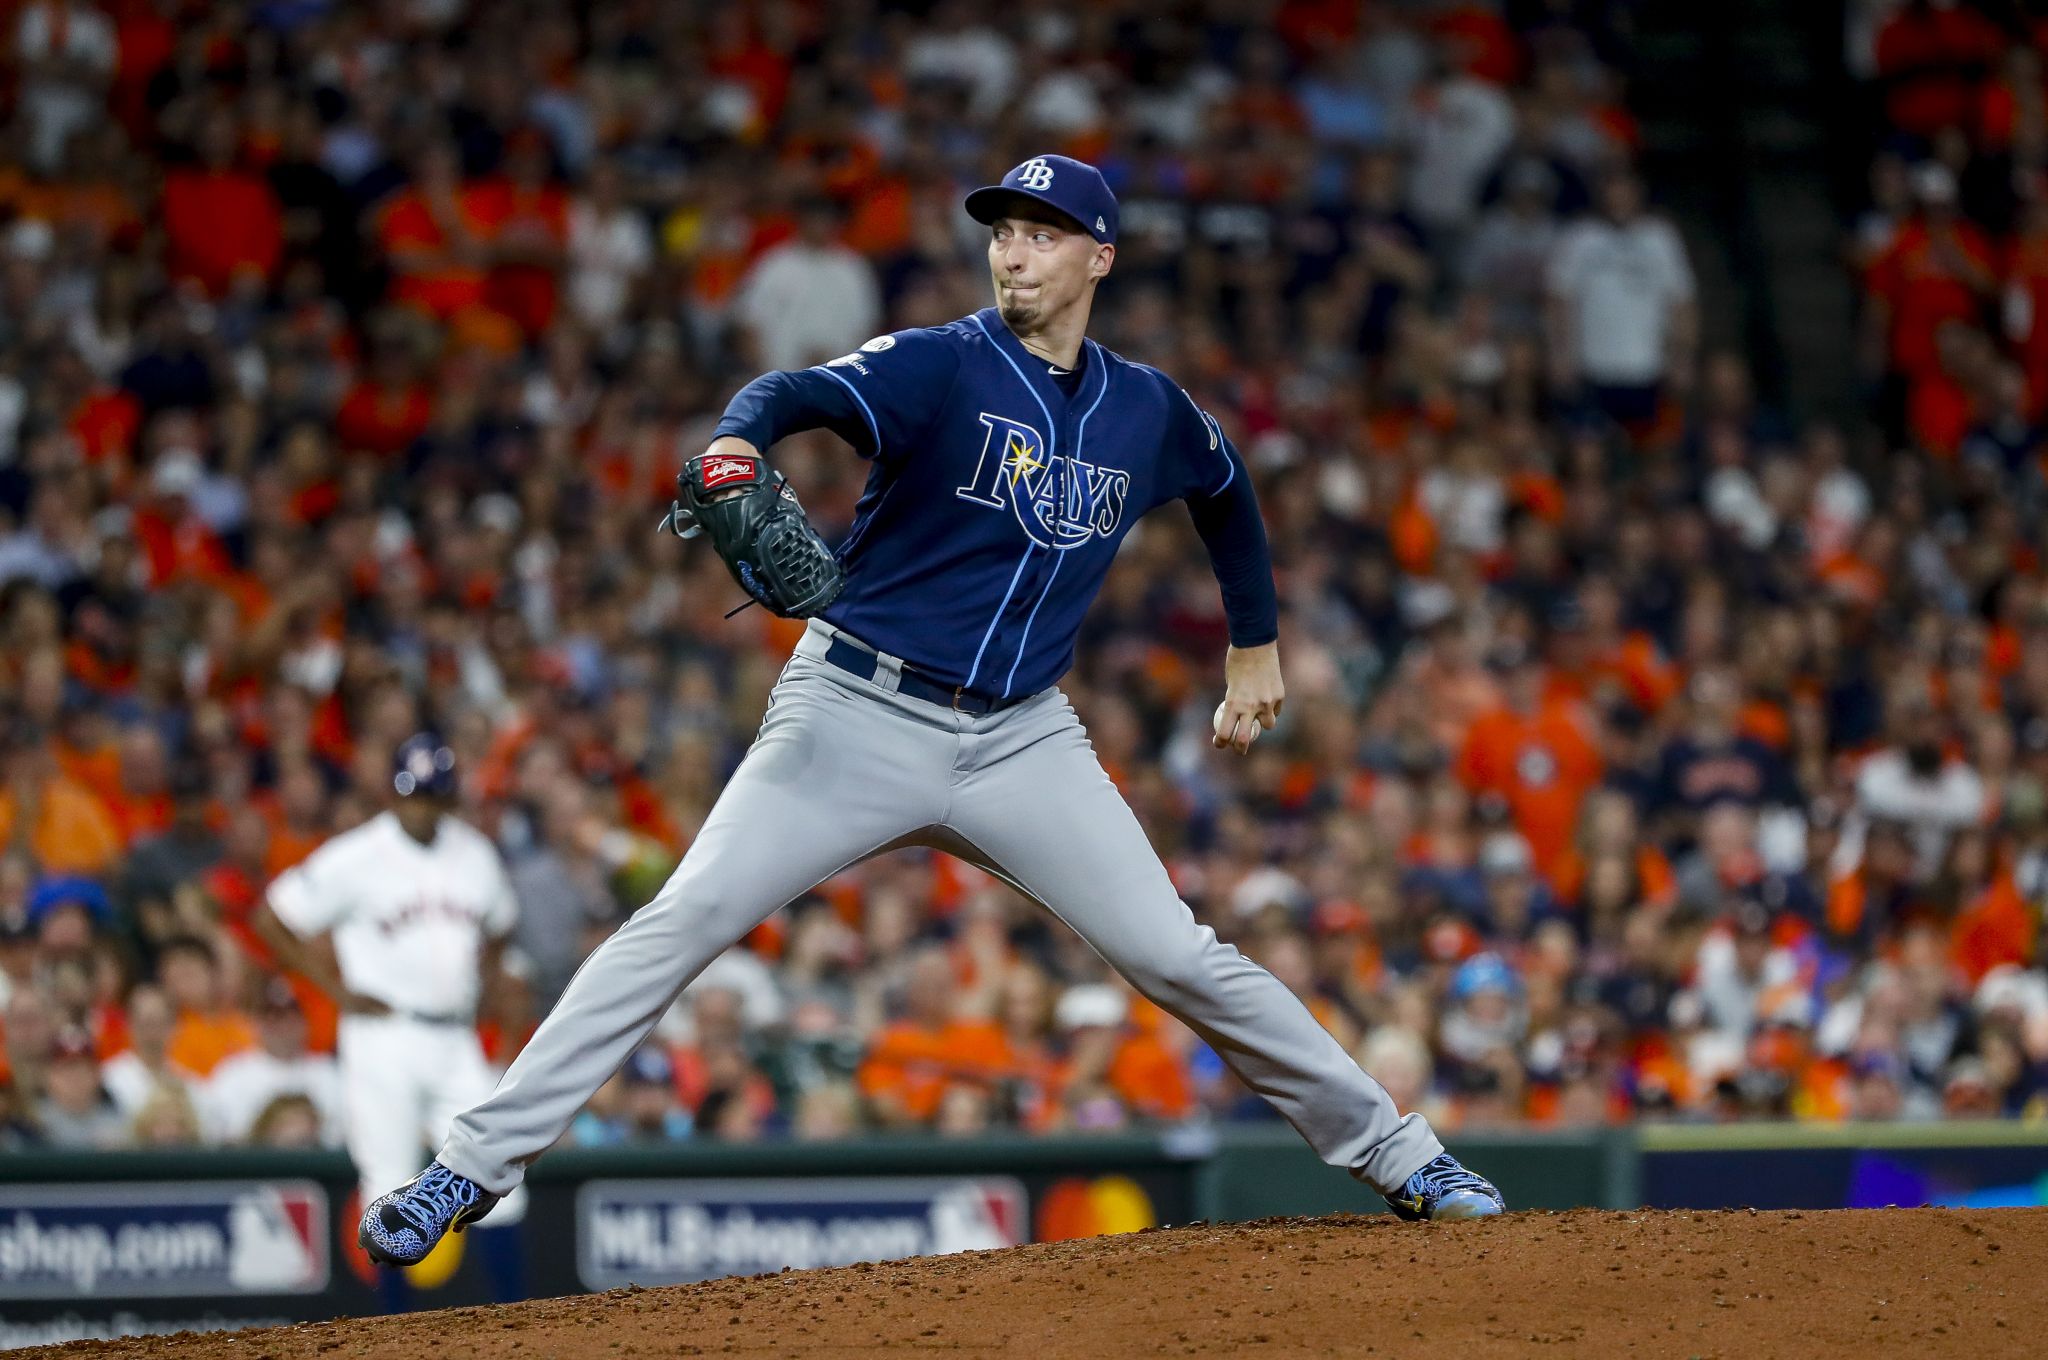 Blake Snell hated being pulled and then the Rays collapsed (Video)